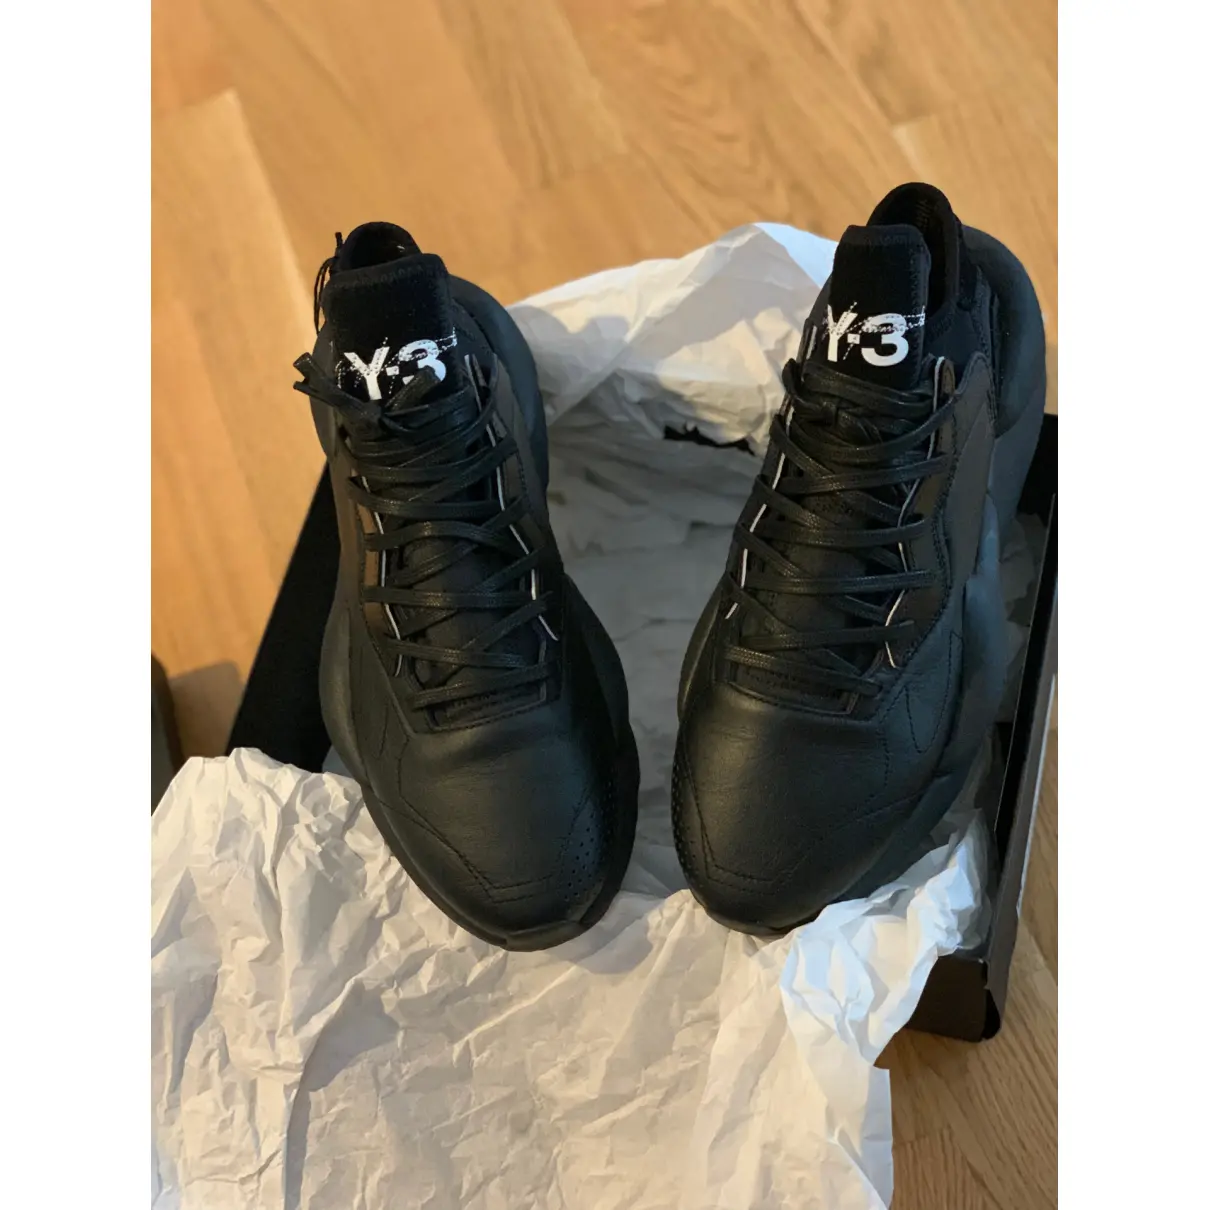 Buy Y-3 Leather low trainers online